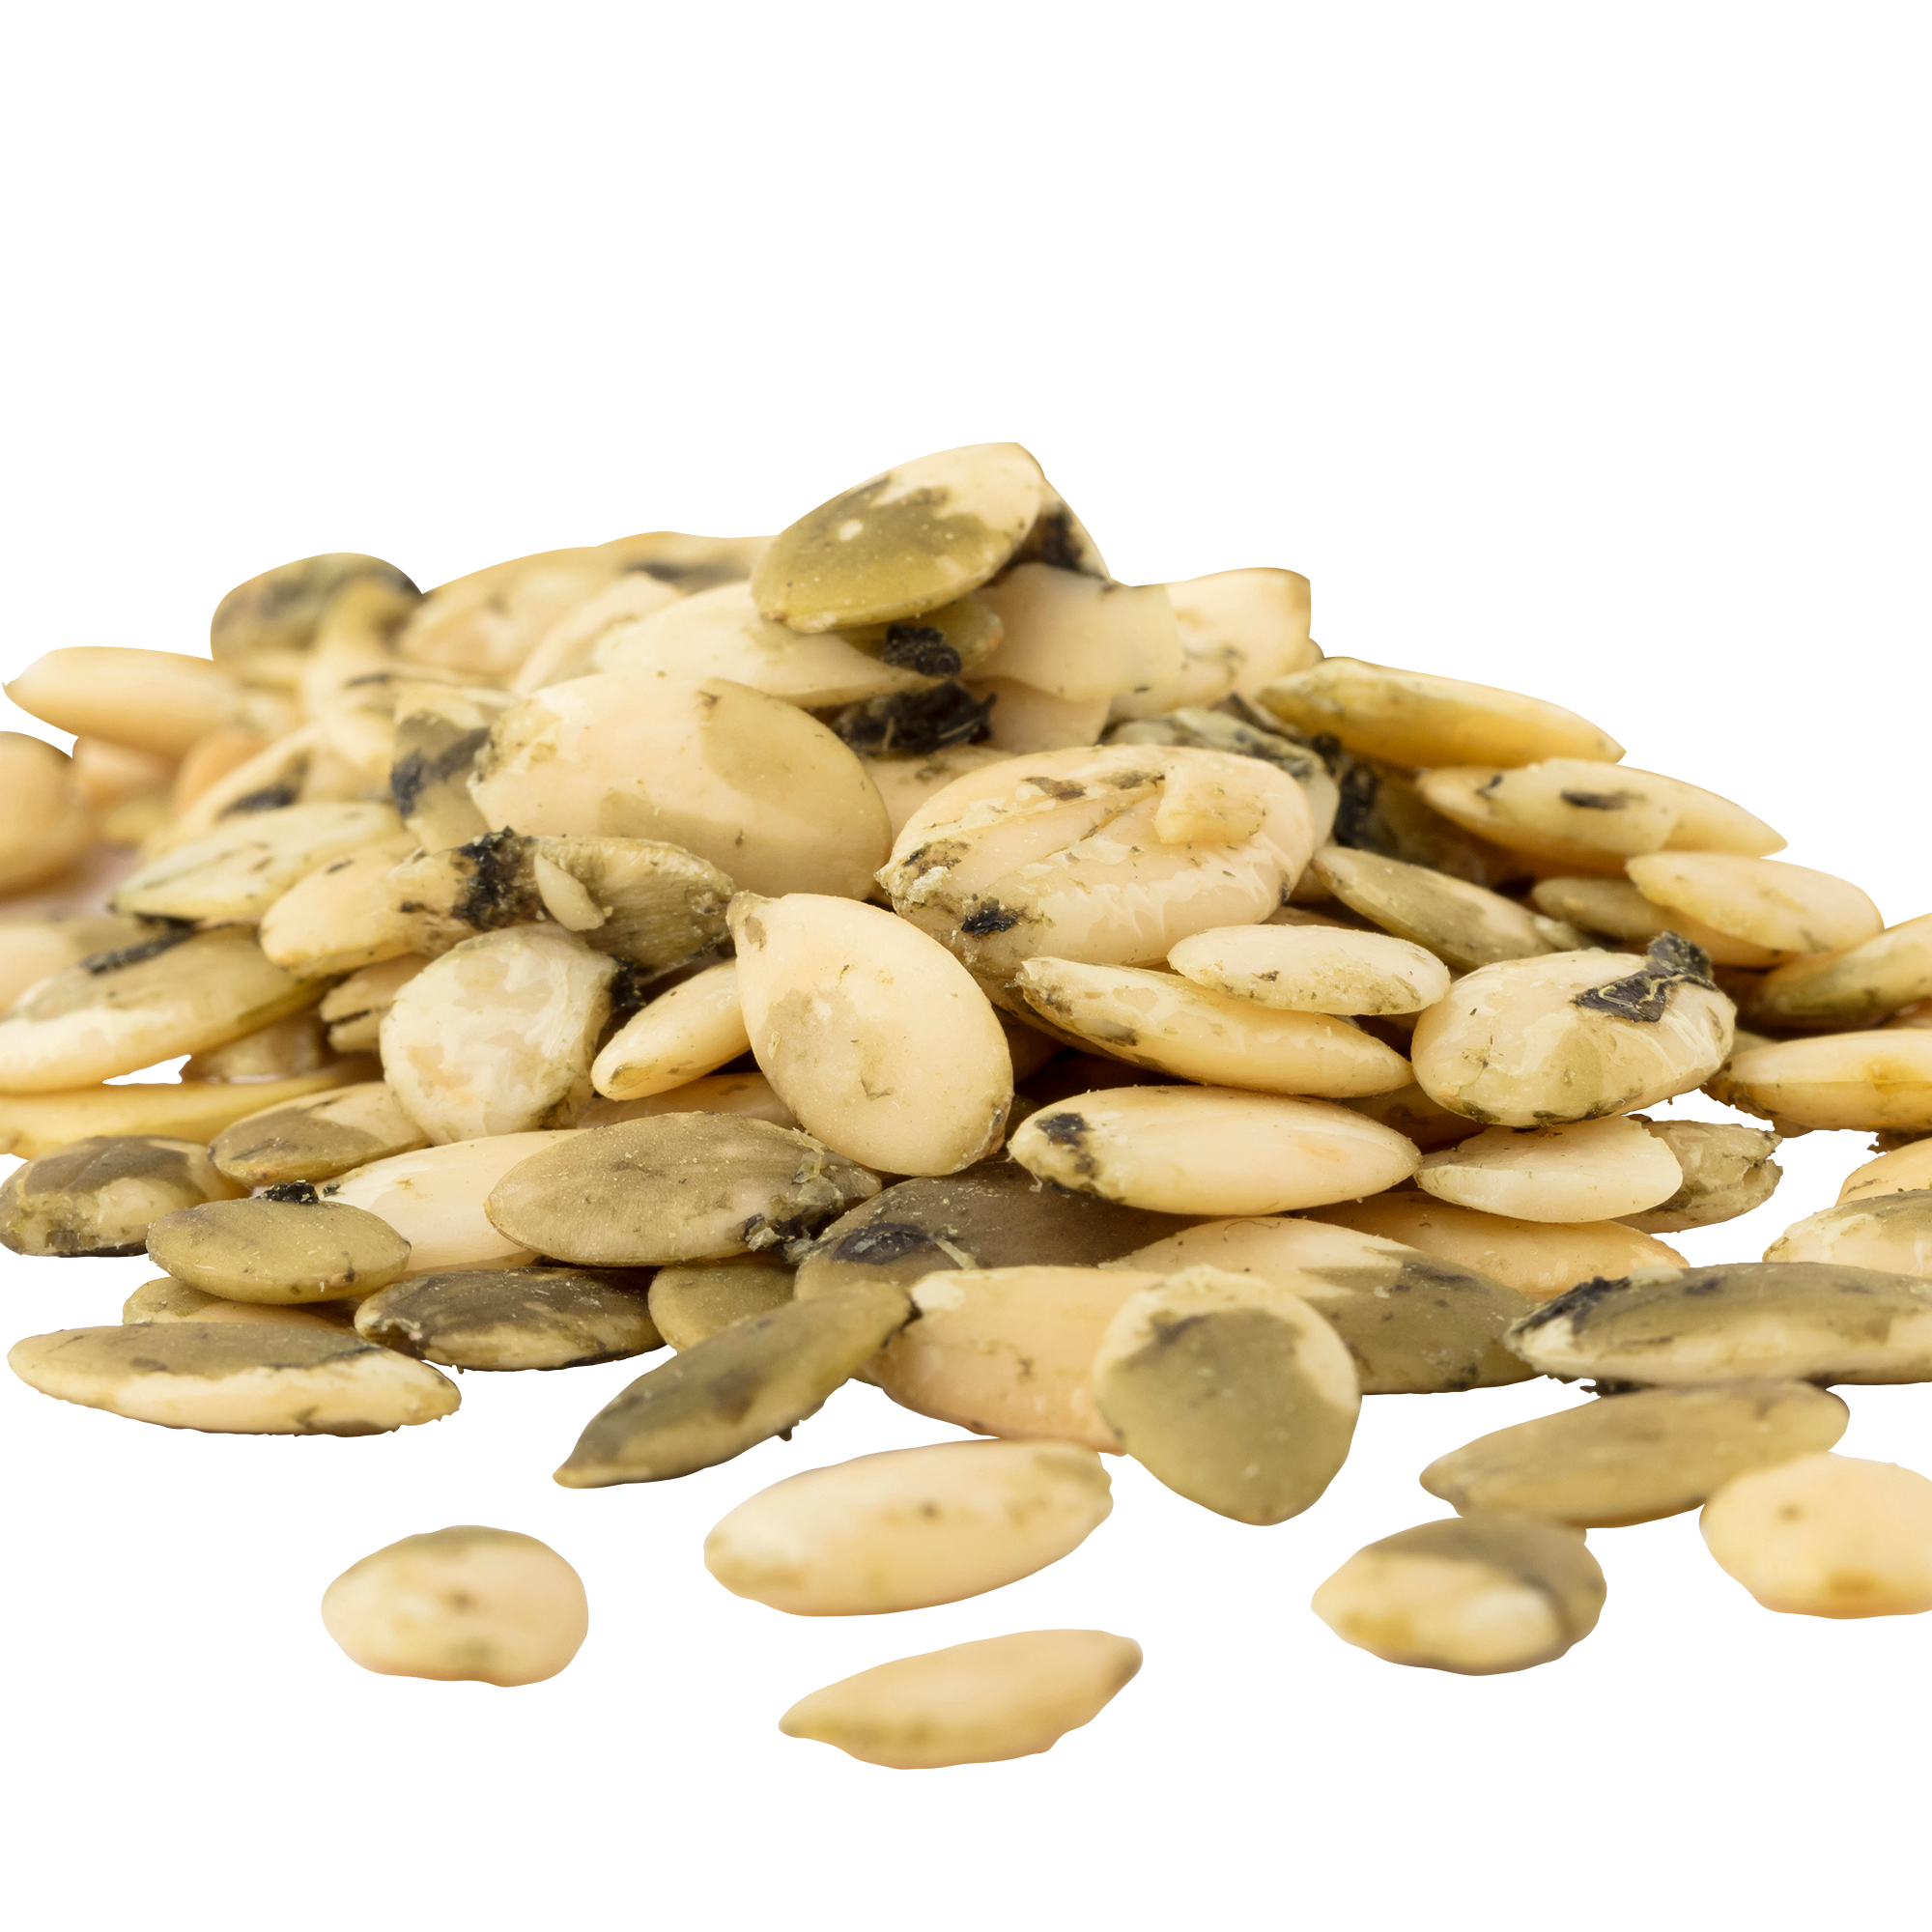 Single Serve Sprouted Pumpkin Seeds - 12 Bags, 1oz Each